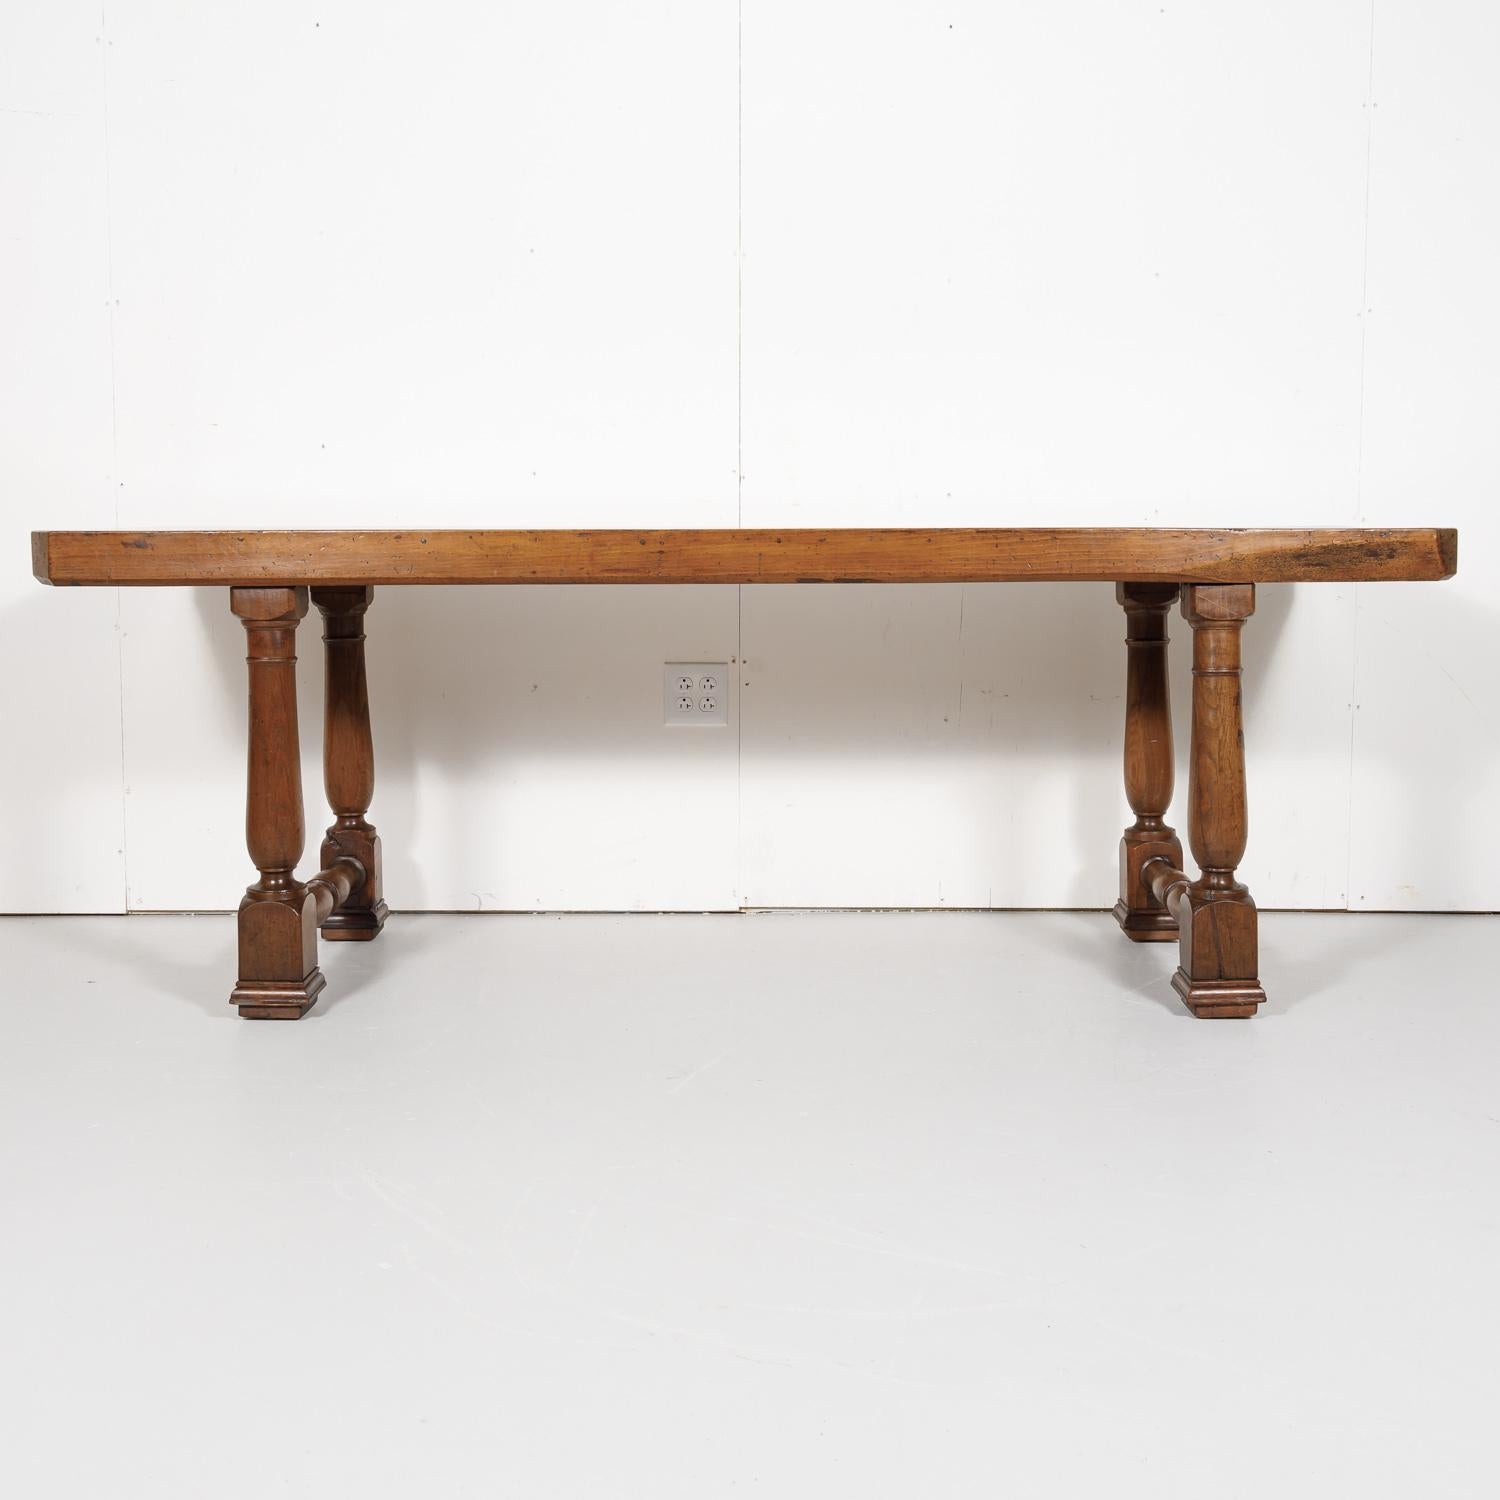 French 18th Century Solid Walnut Provincial Console or Dining Table